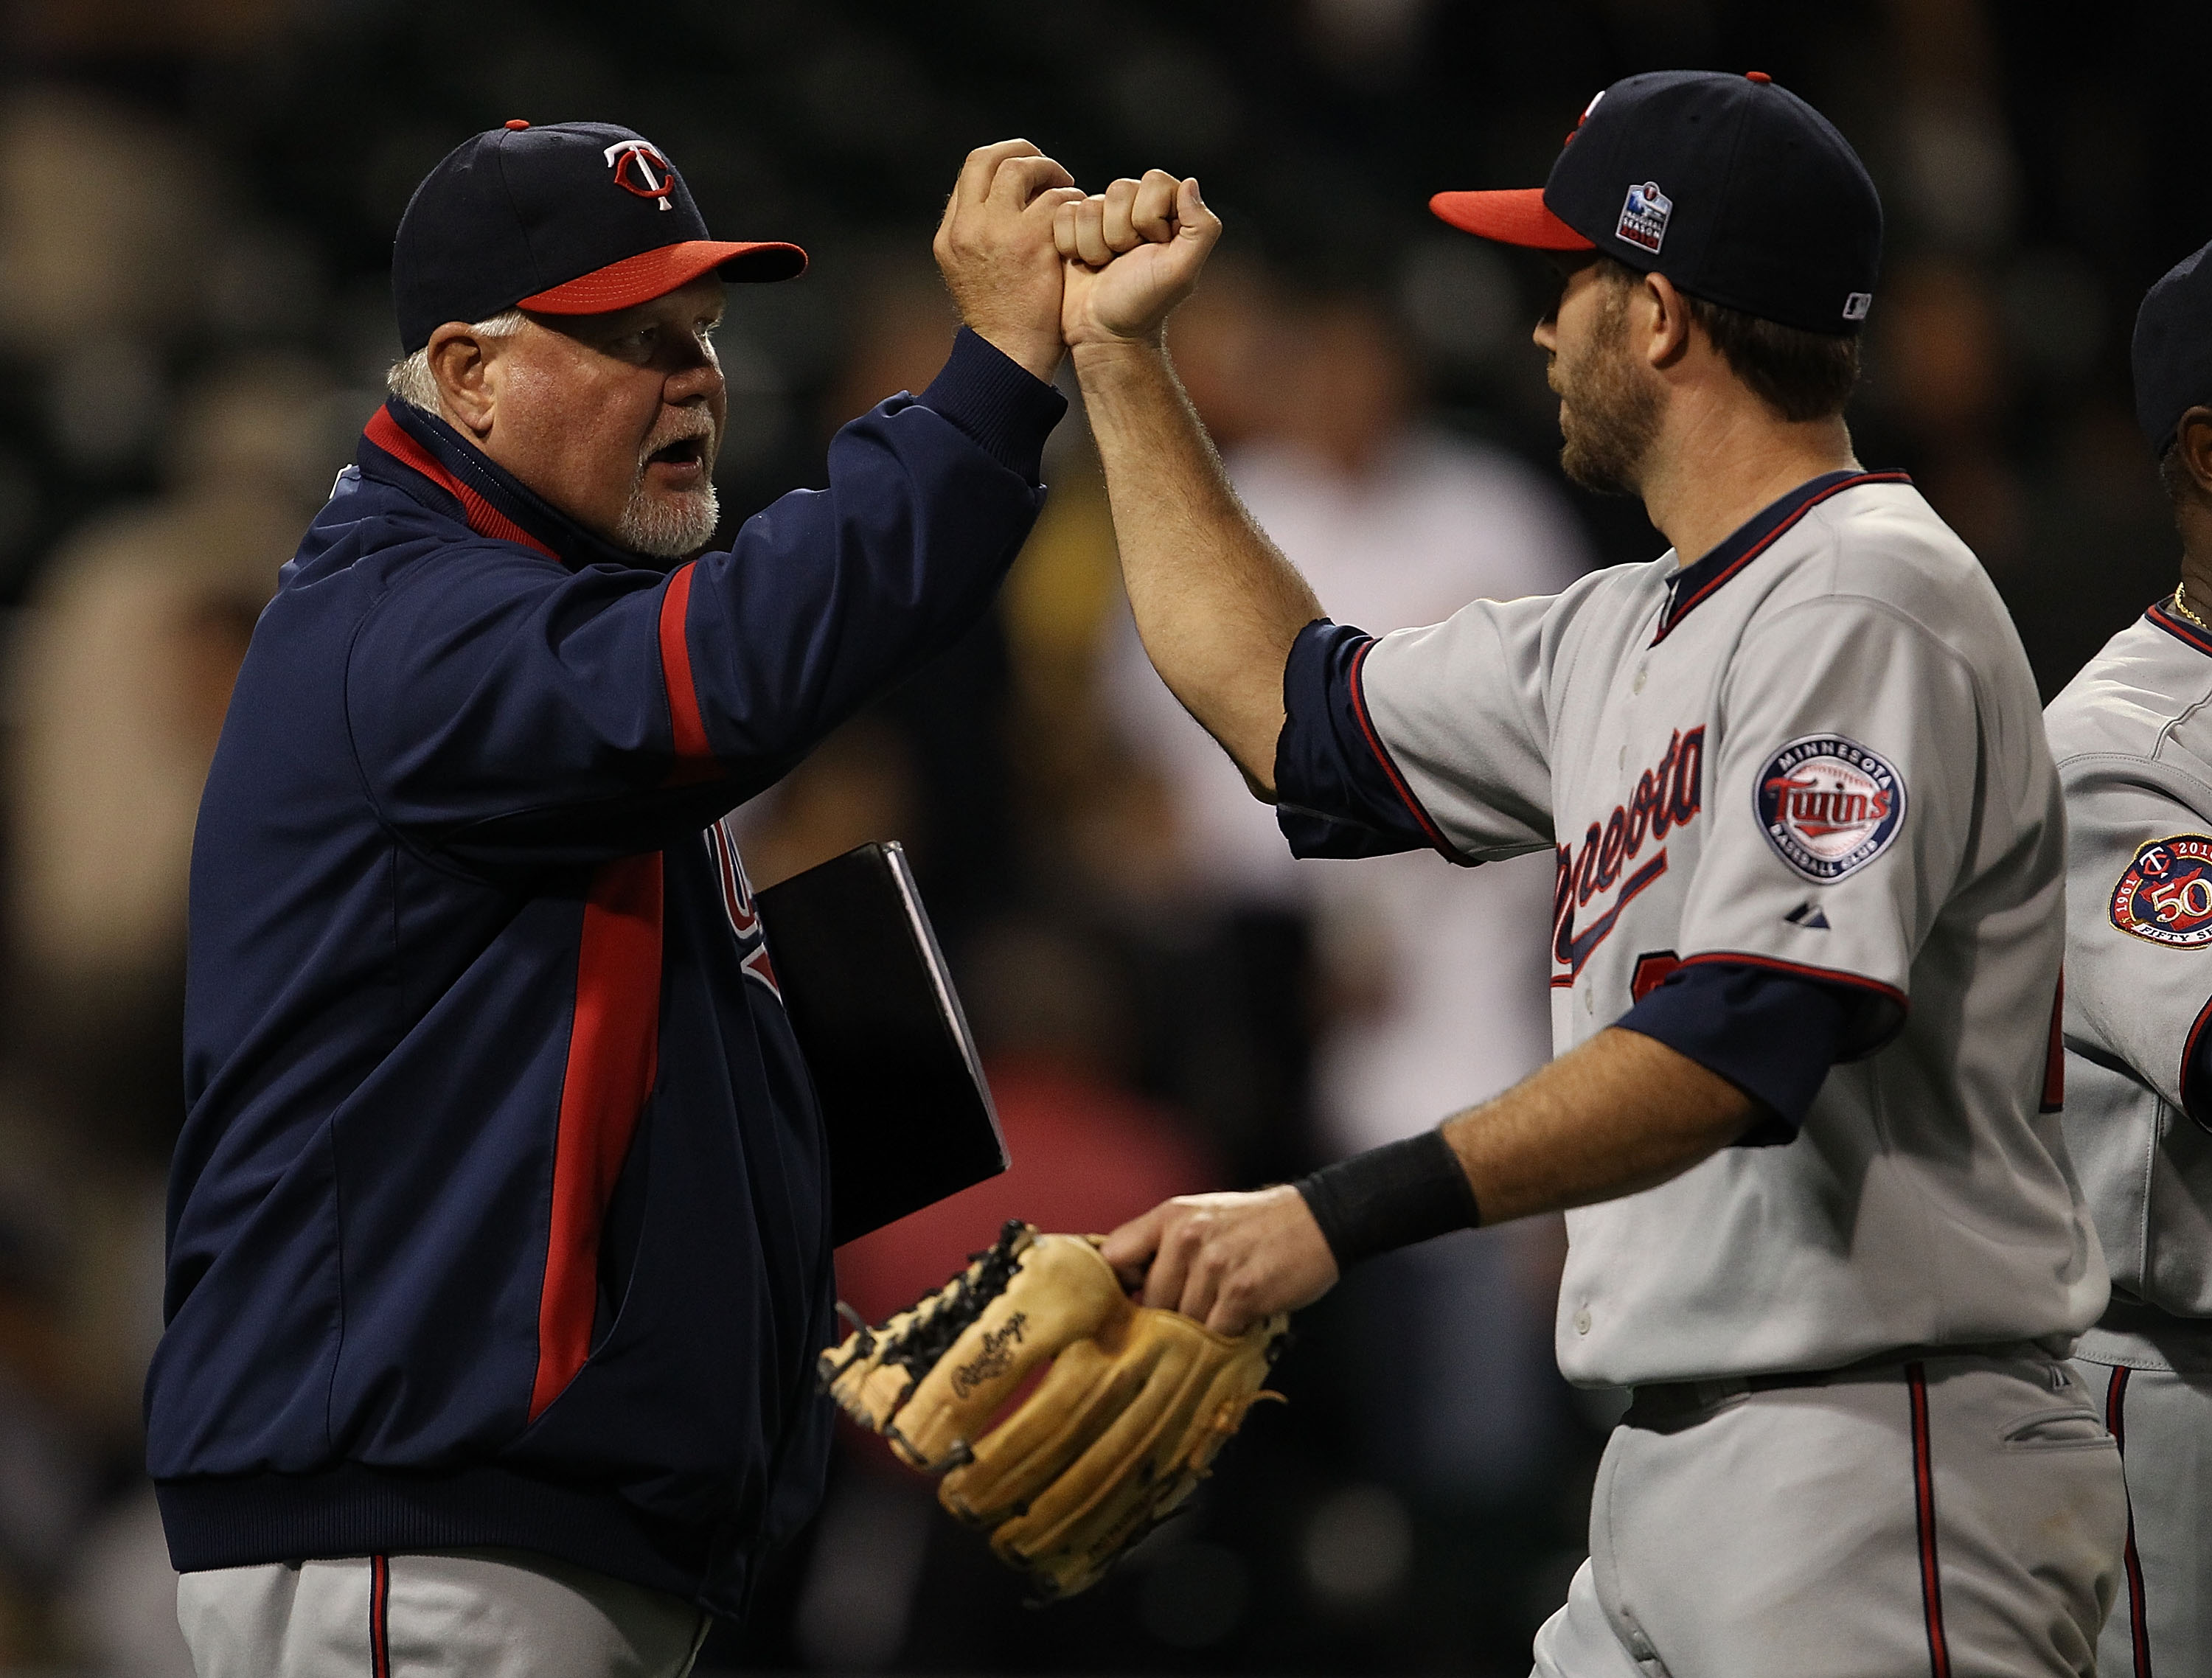 CHICAGO - SEPTEMBER 14: Manager Ron Gardenhire #35 of the Minnesota Twins congratulates J.J. Hardy #27 after a win over the Chicago White Sox at U.S. Cellular Field on September 14, 2010 in Chicago, Illinois. The Twins defeated the White Sox 9-3.  (Photo